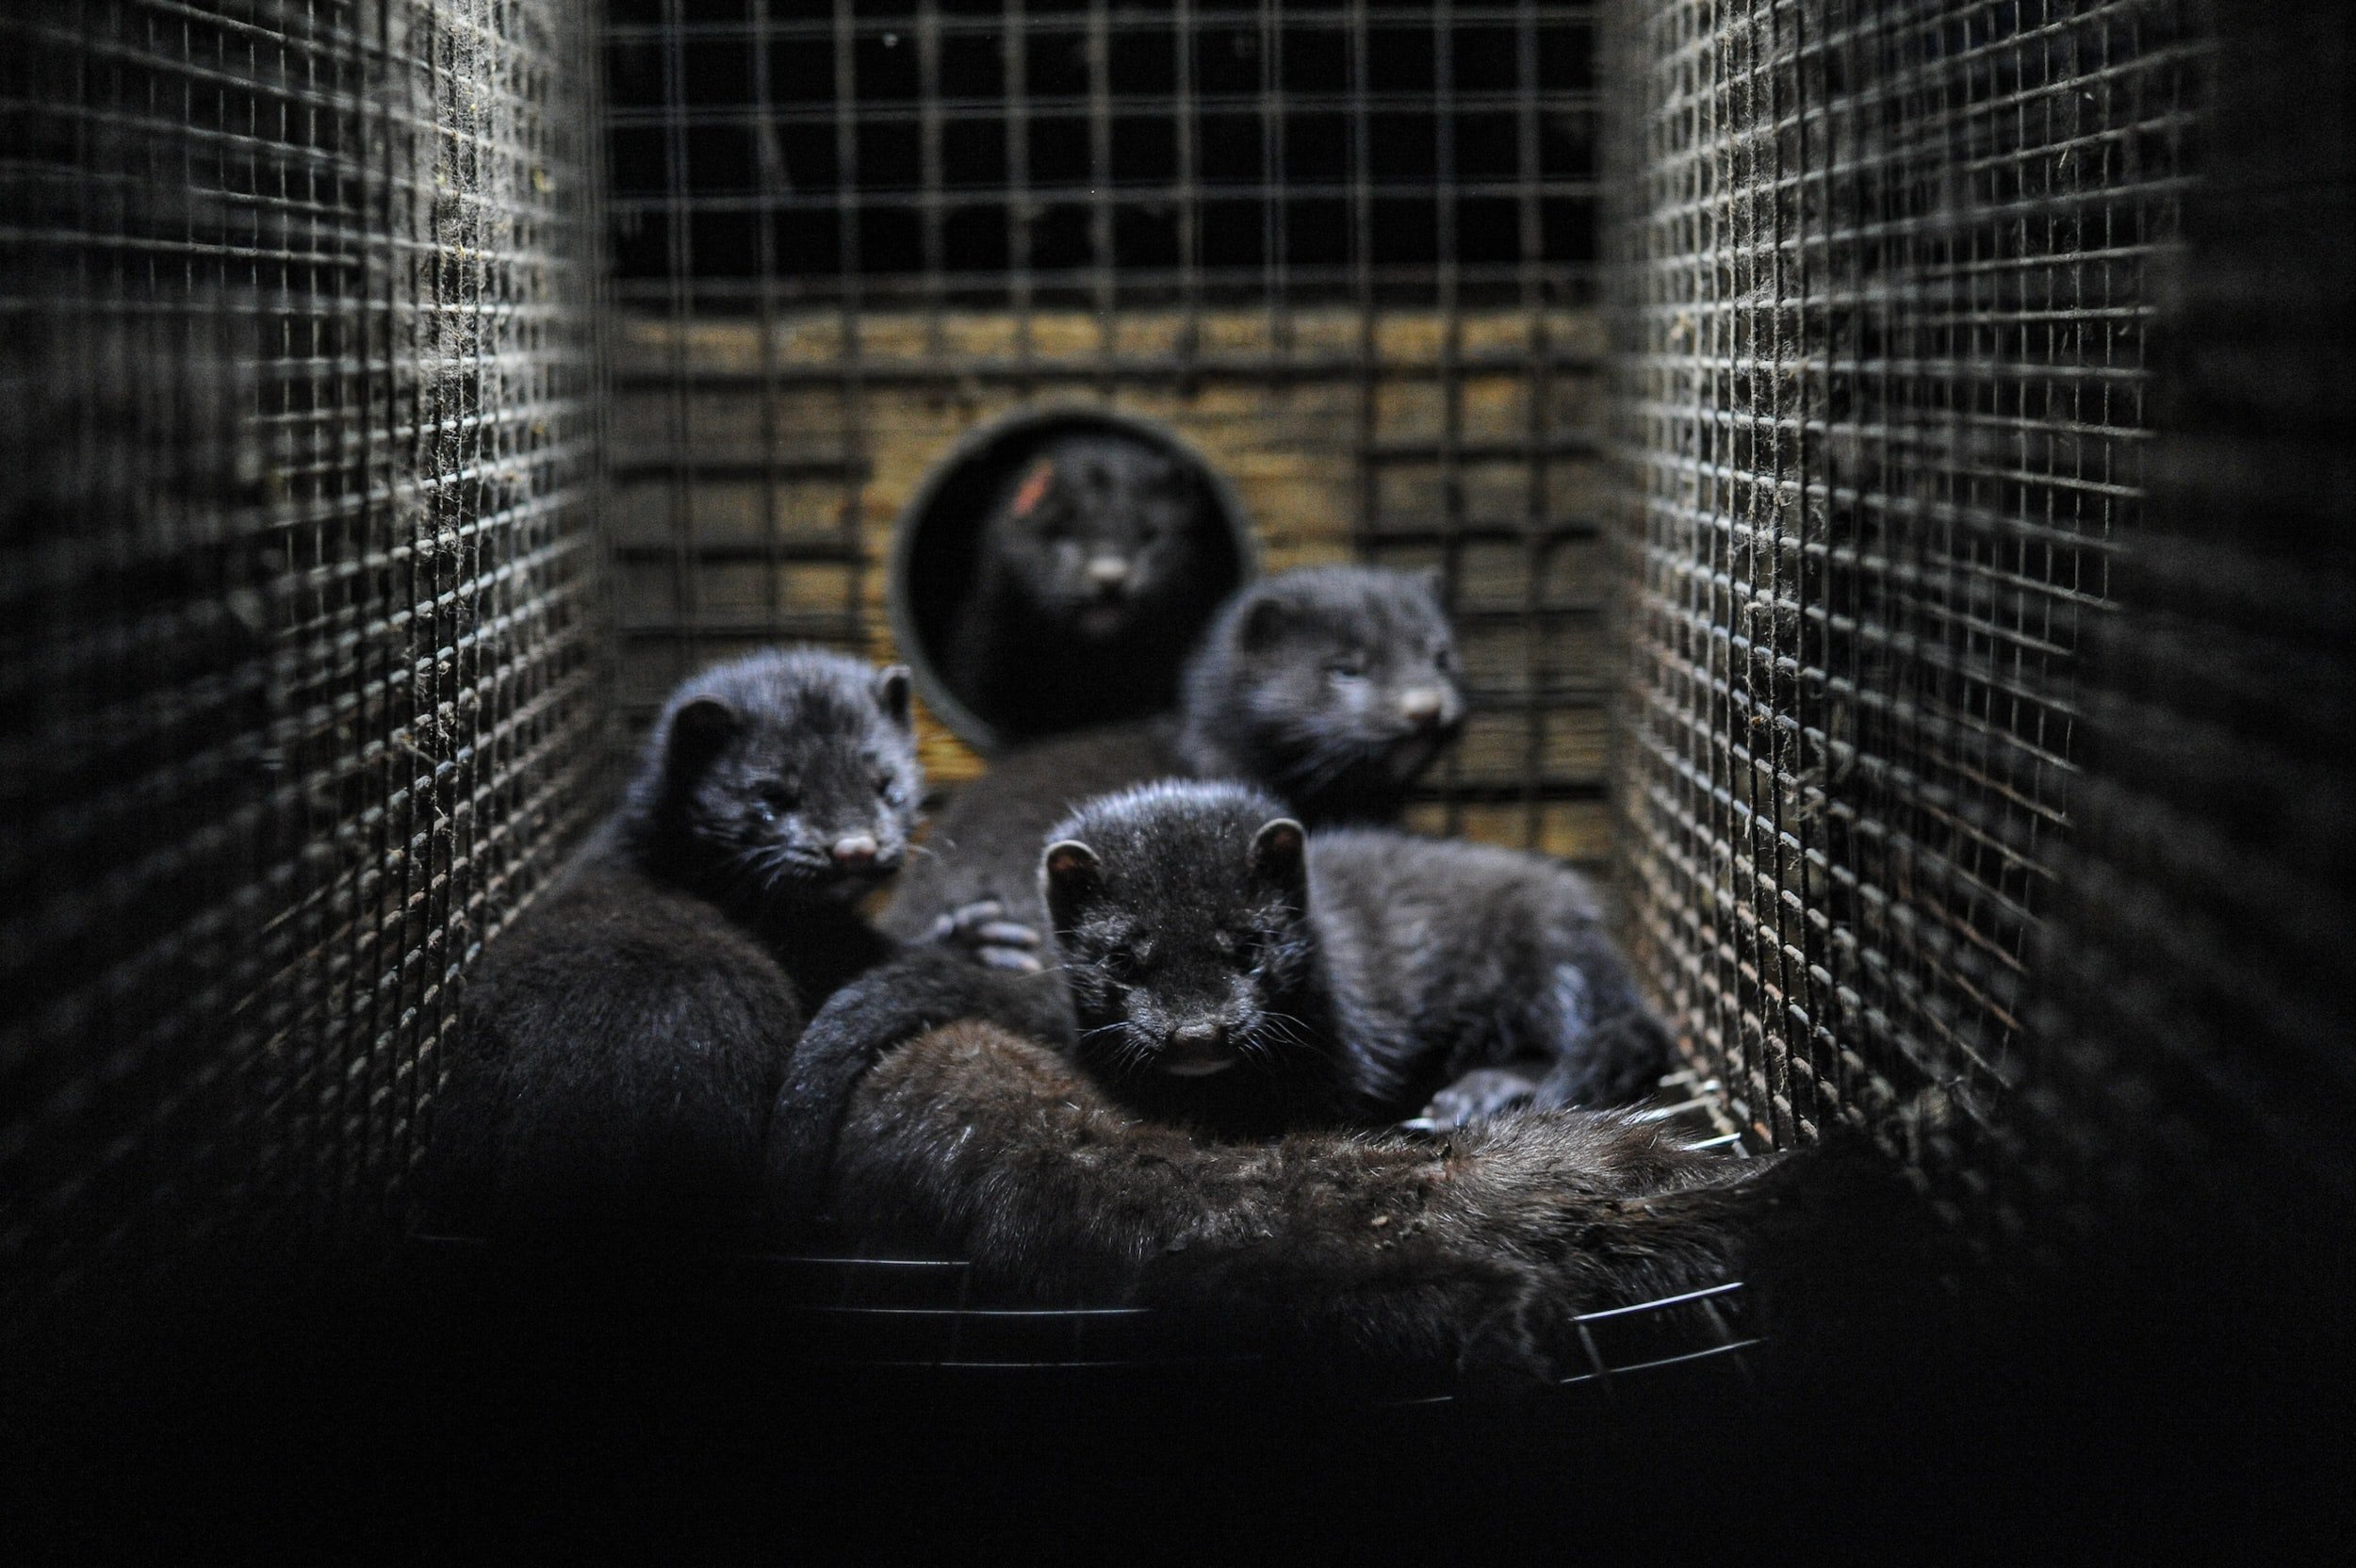 Debate: There is a lack of political courage and will to close down mink farming in Denmark